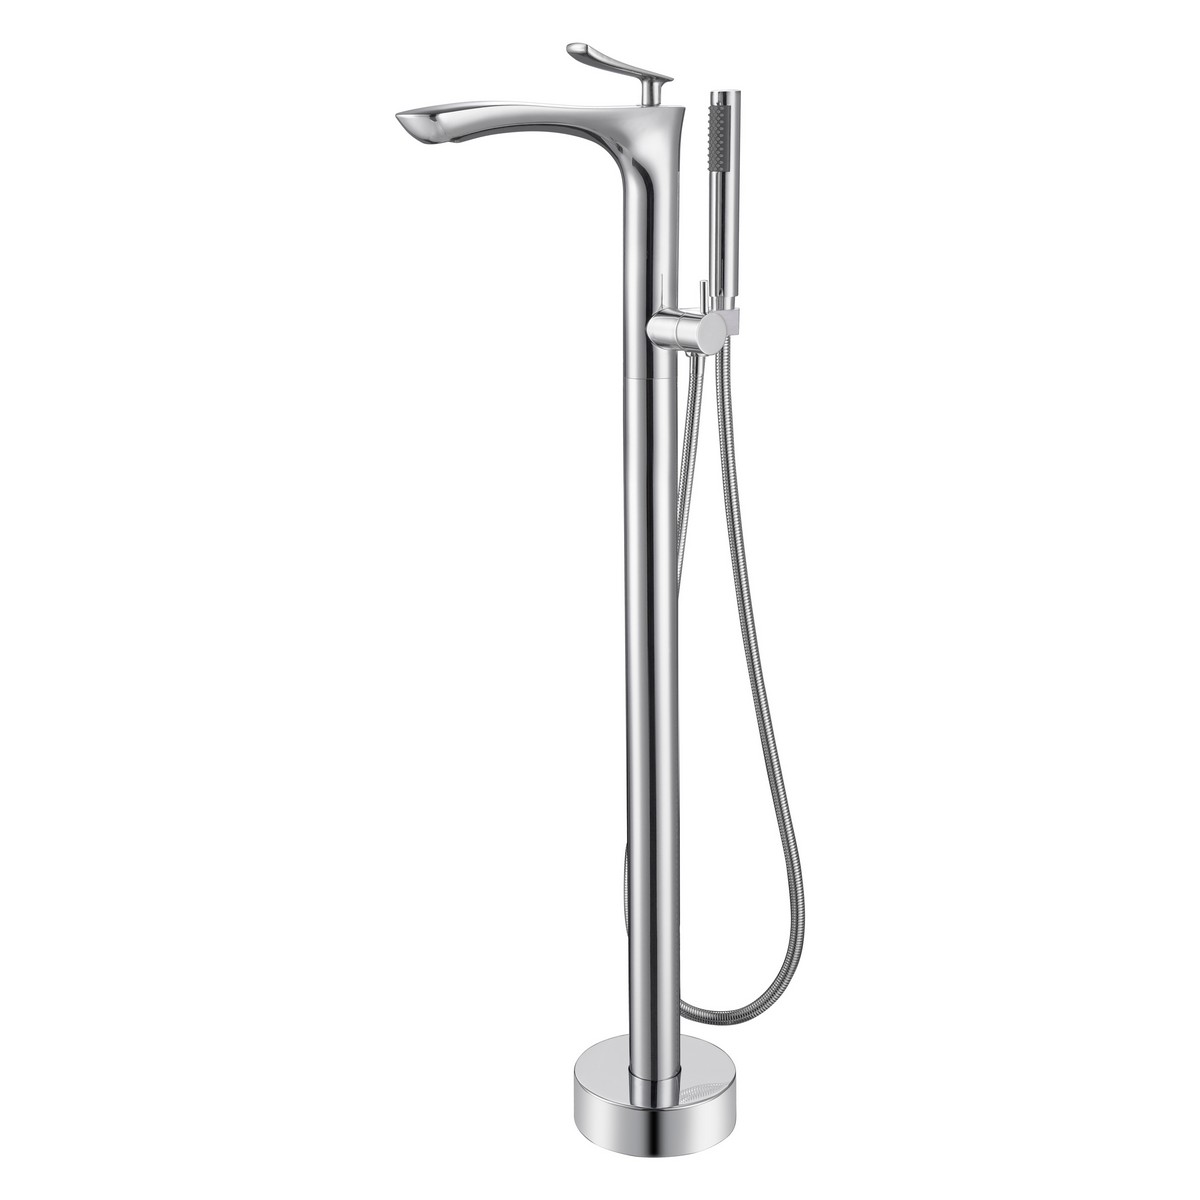 BARCLAY 7974 KAYLA 40 1/4 INCH FREESTANDING TUB FILLER WITH HAND SHOWER AND LEVER HANDLE